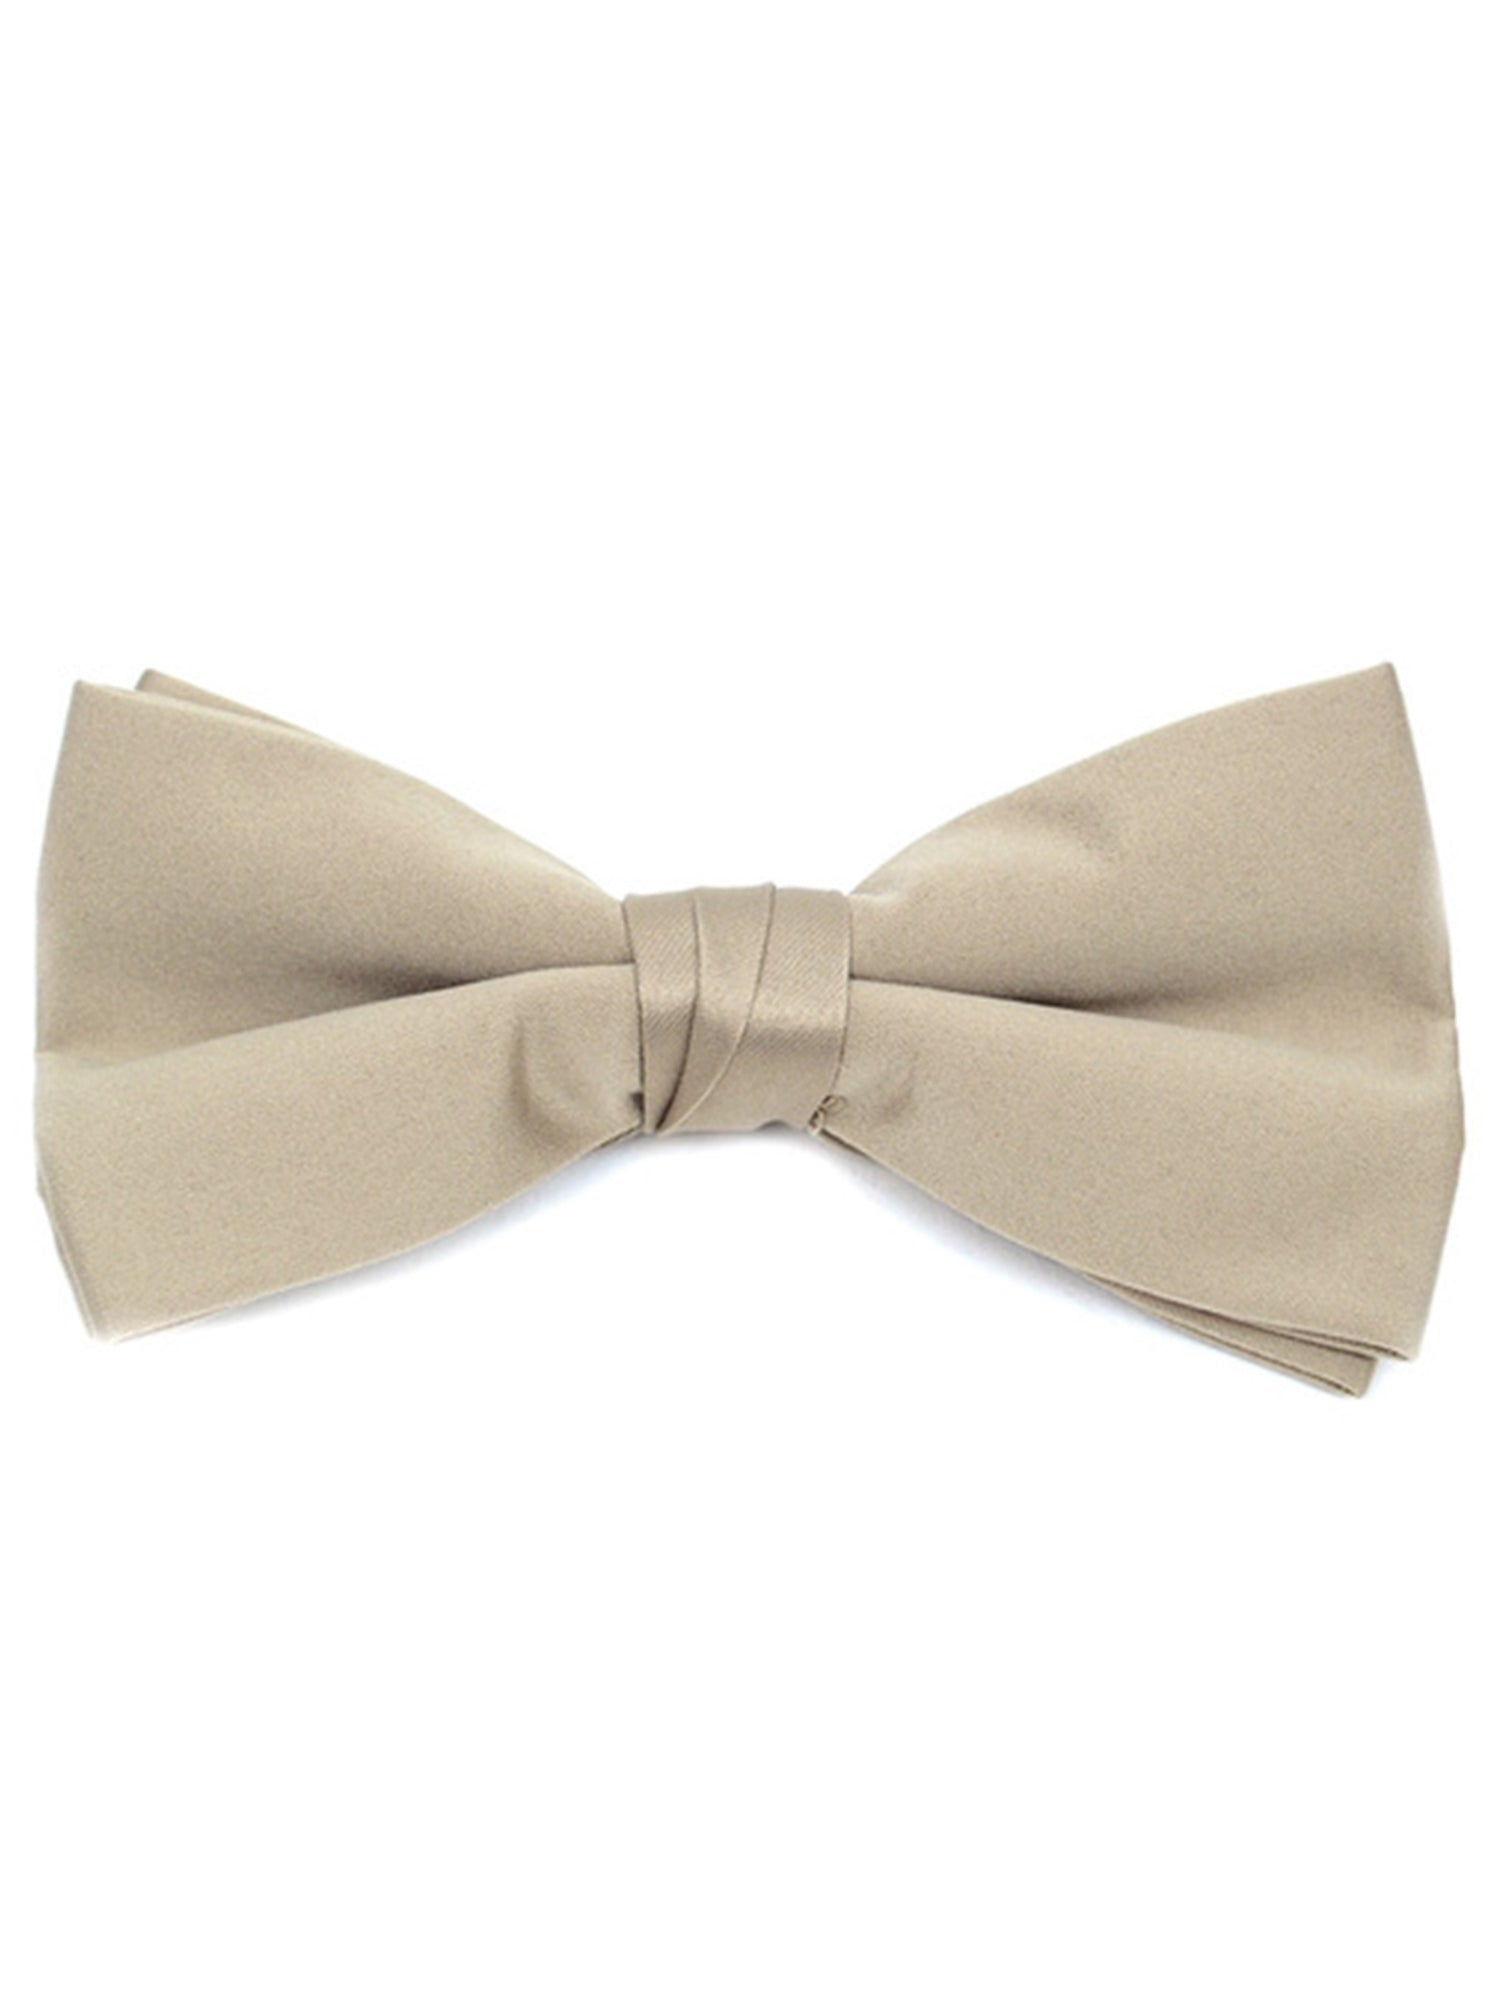 Men's Pre-tied Adjustable Length Bow Tie - Formal Tuxedo Solid Color Men's Solid Color Bow Tie TheDapperTie Taupe One Size 